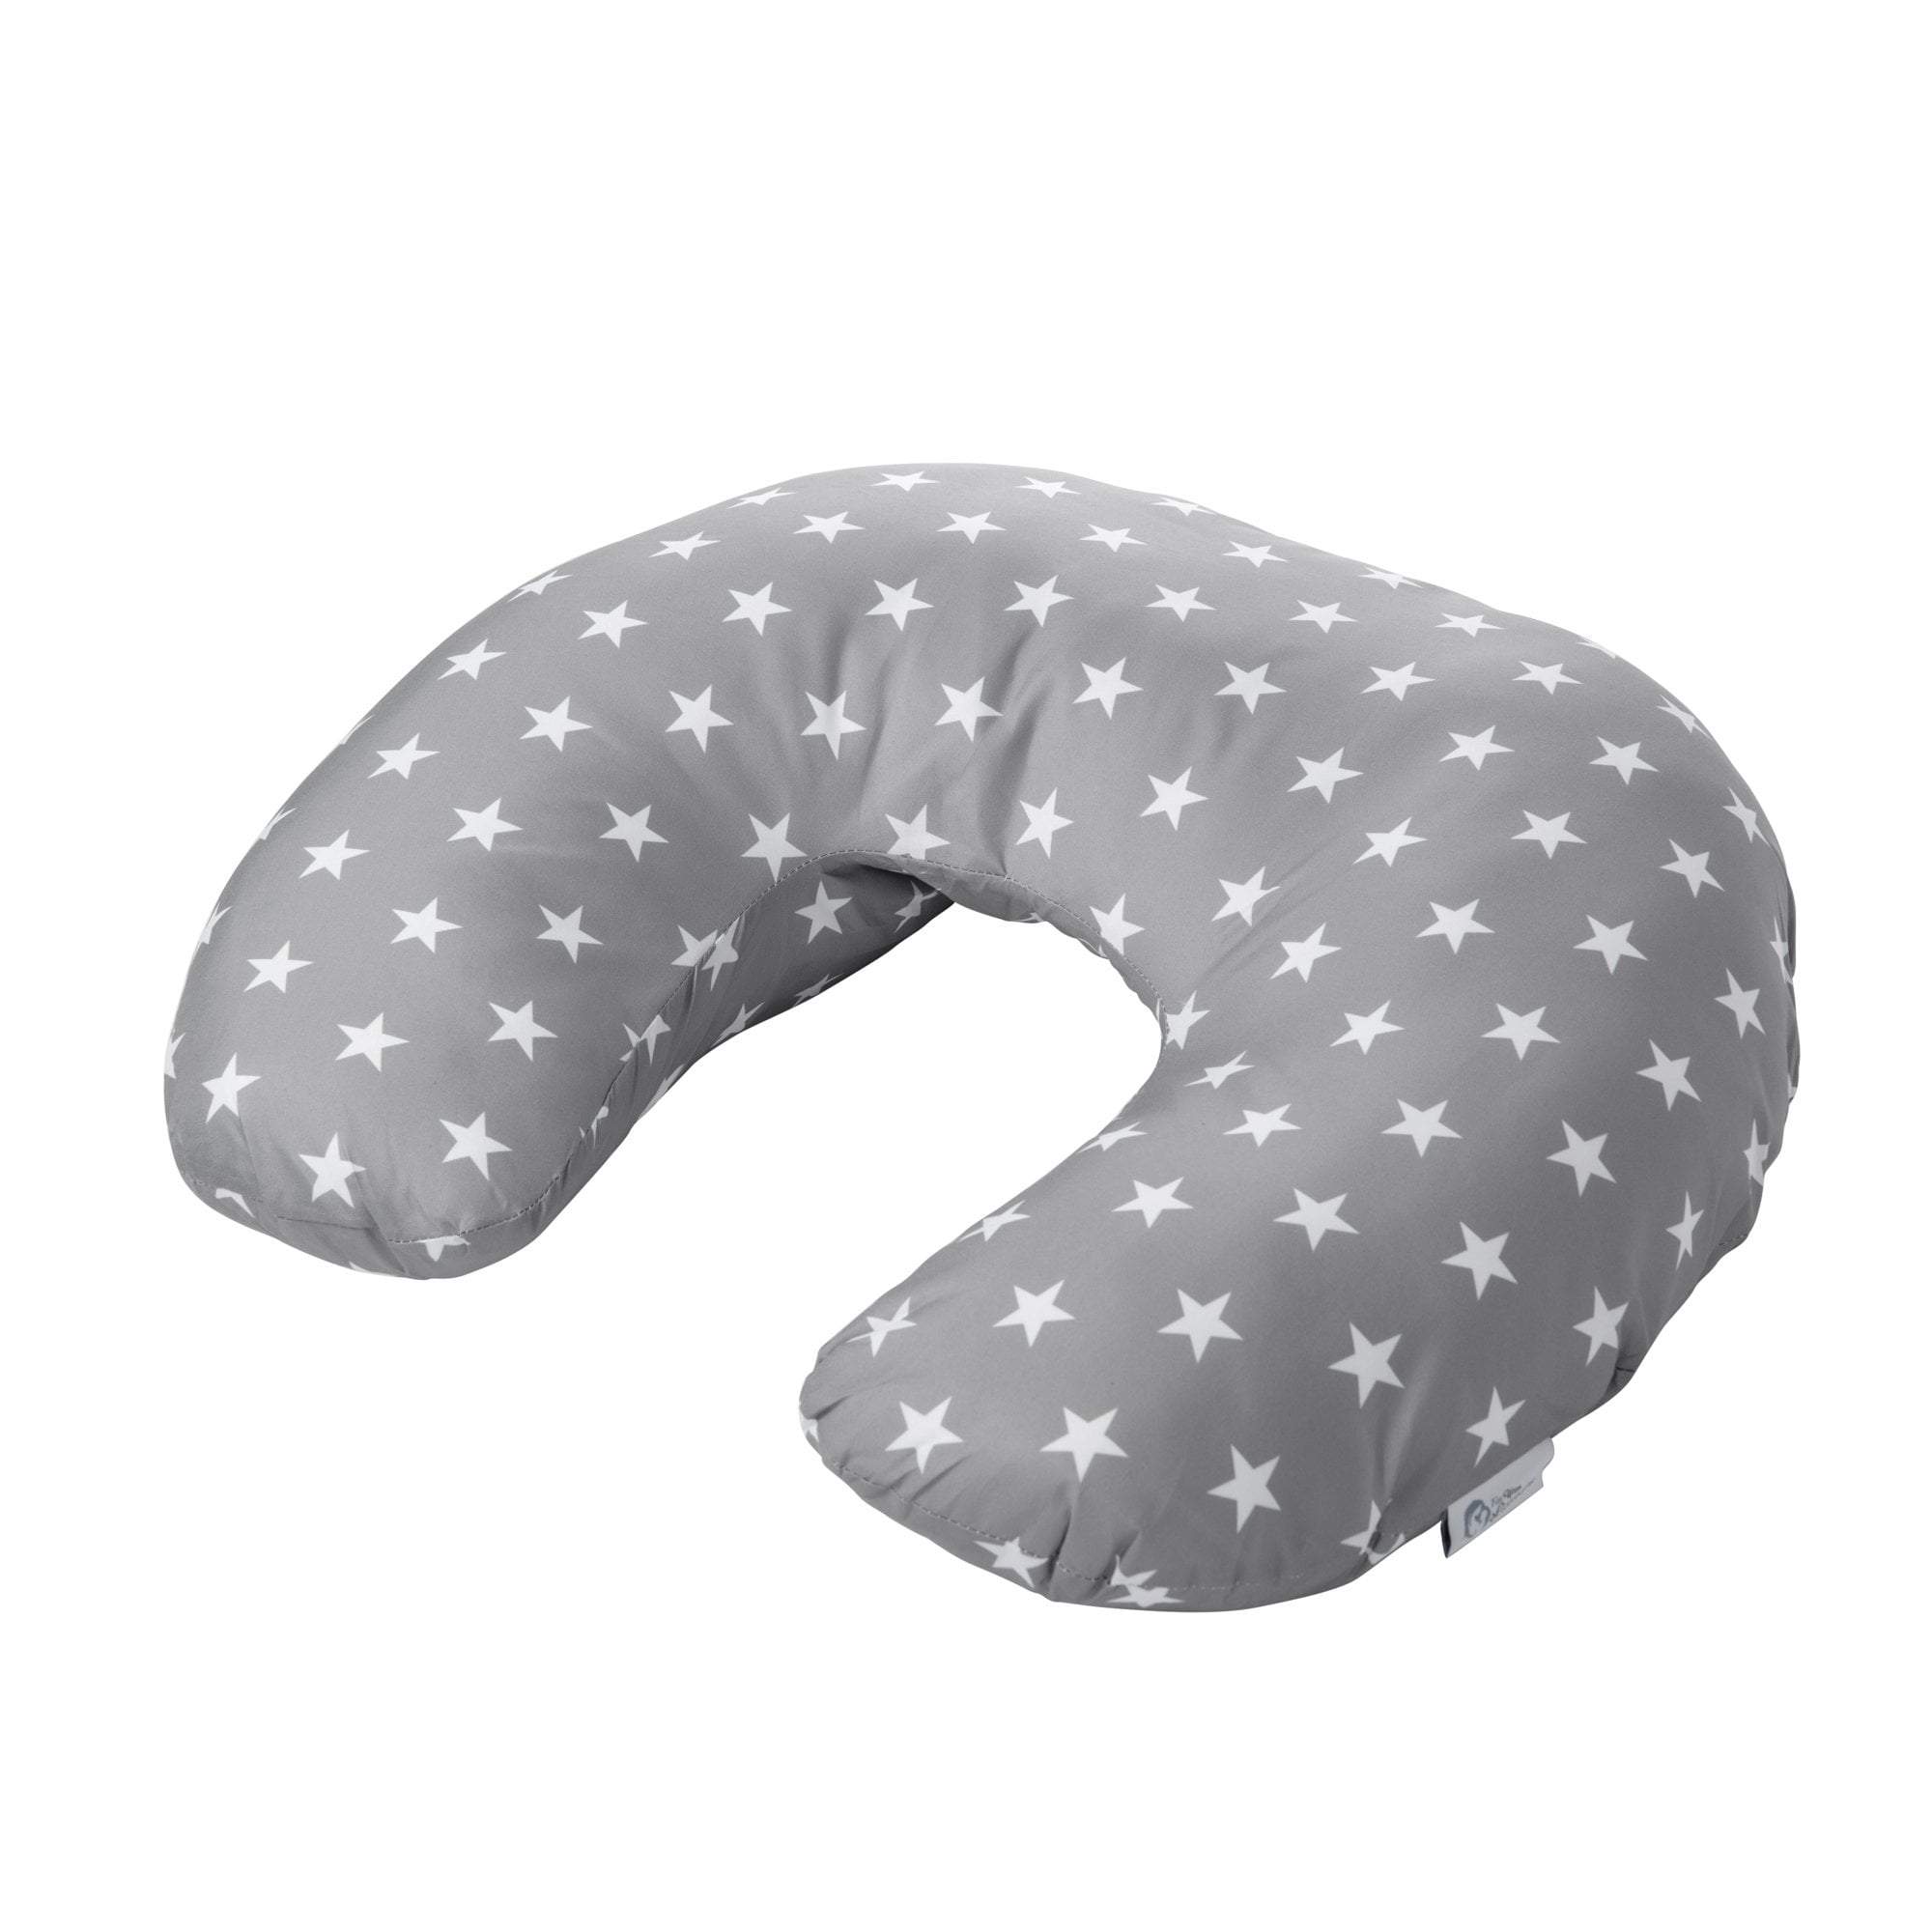 Breast Feeding Maternity Nursing Pillow - Grey with Stars - For Your Little One